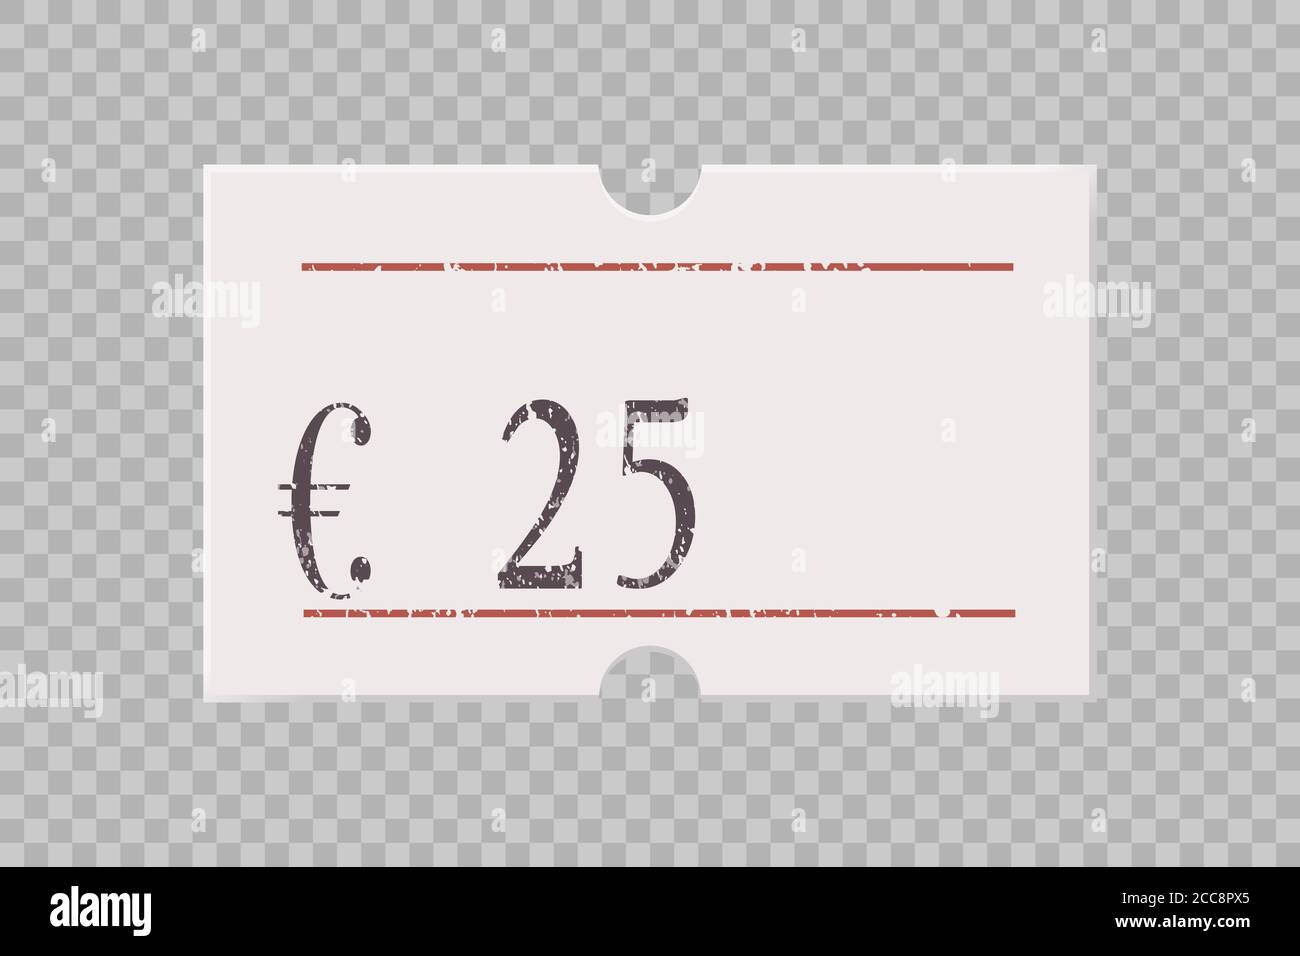 Euro price tag with digit numbers isolated on transparent background. Paper sticker, label, badge for different goods and product. Realistic vector Stock Vector